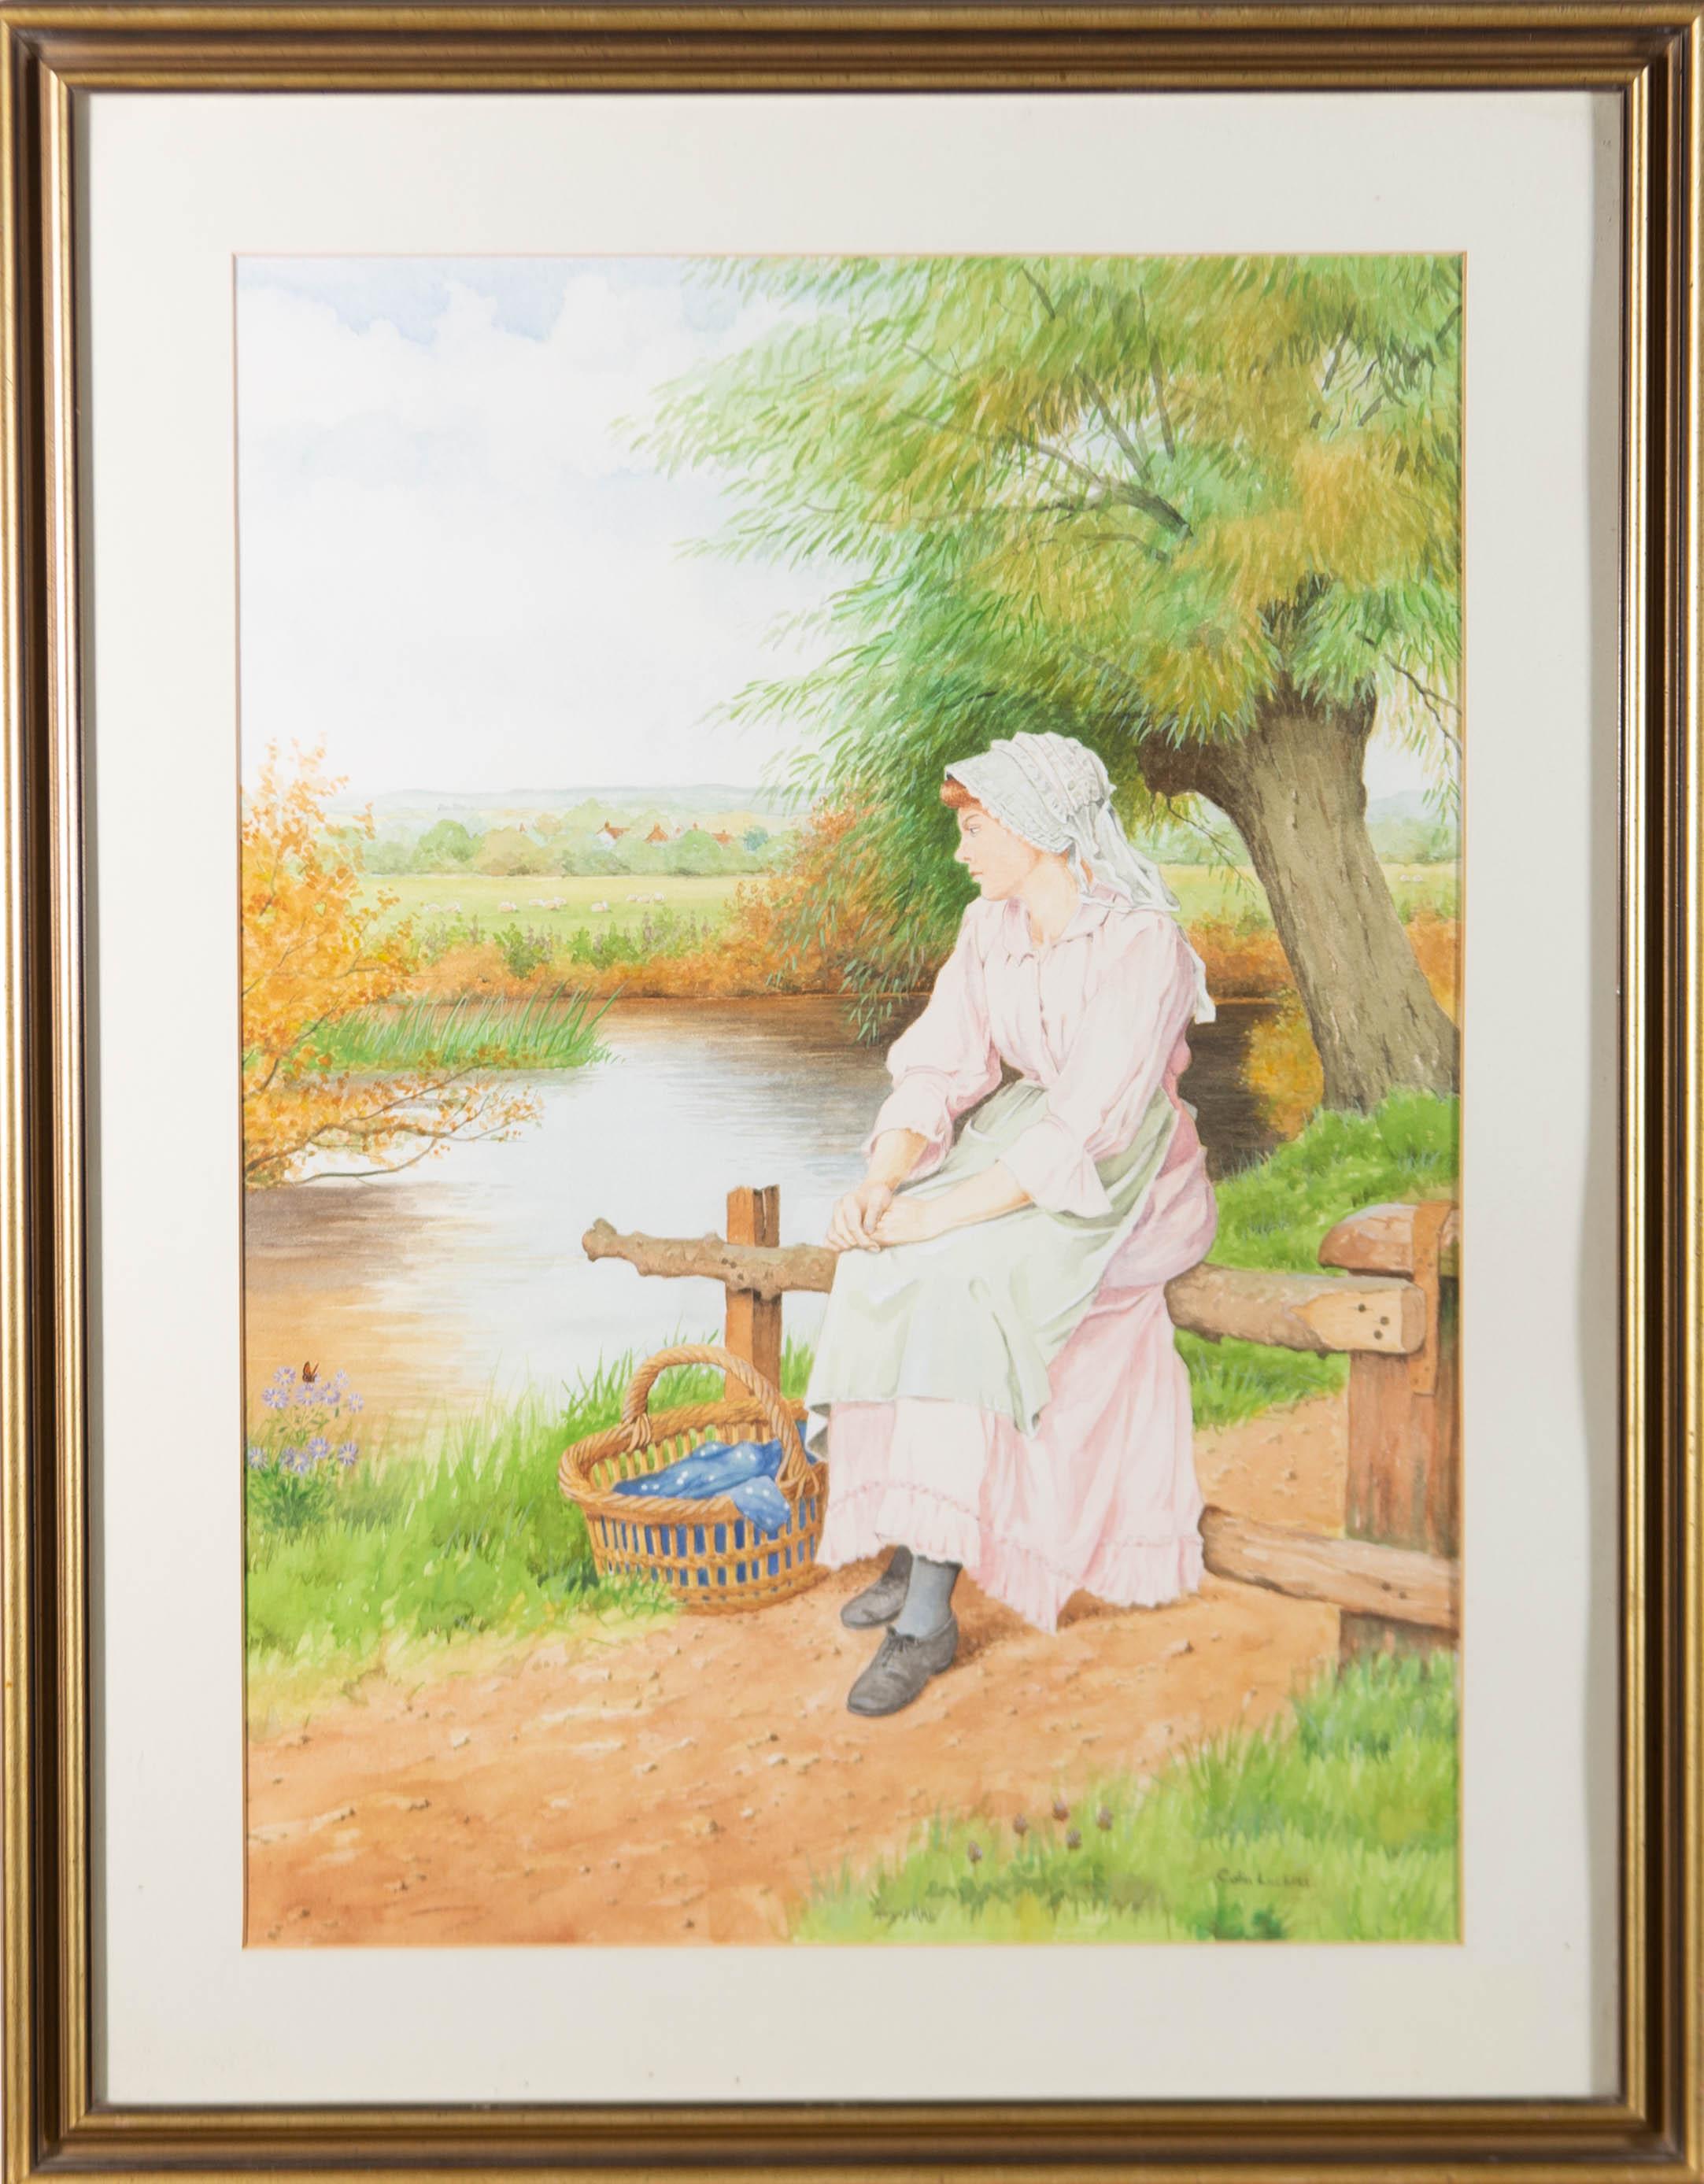 Bright watercolours delicately depict a lady in pink sitting under a willow tree.

The artwork is signed in the bottom right-hand corner, and inscribed and dated on the reverse.

Well presented in a modern wood frame with molded and gilded details,